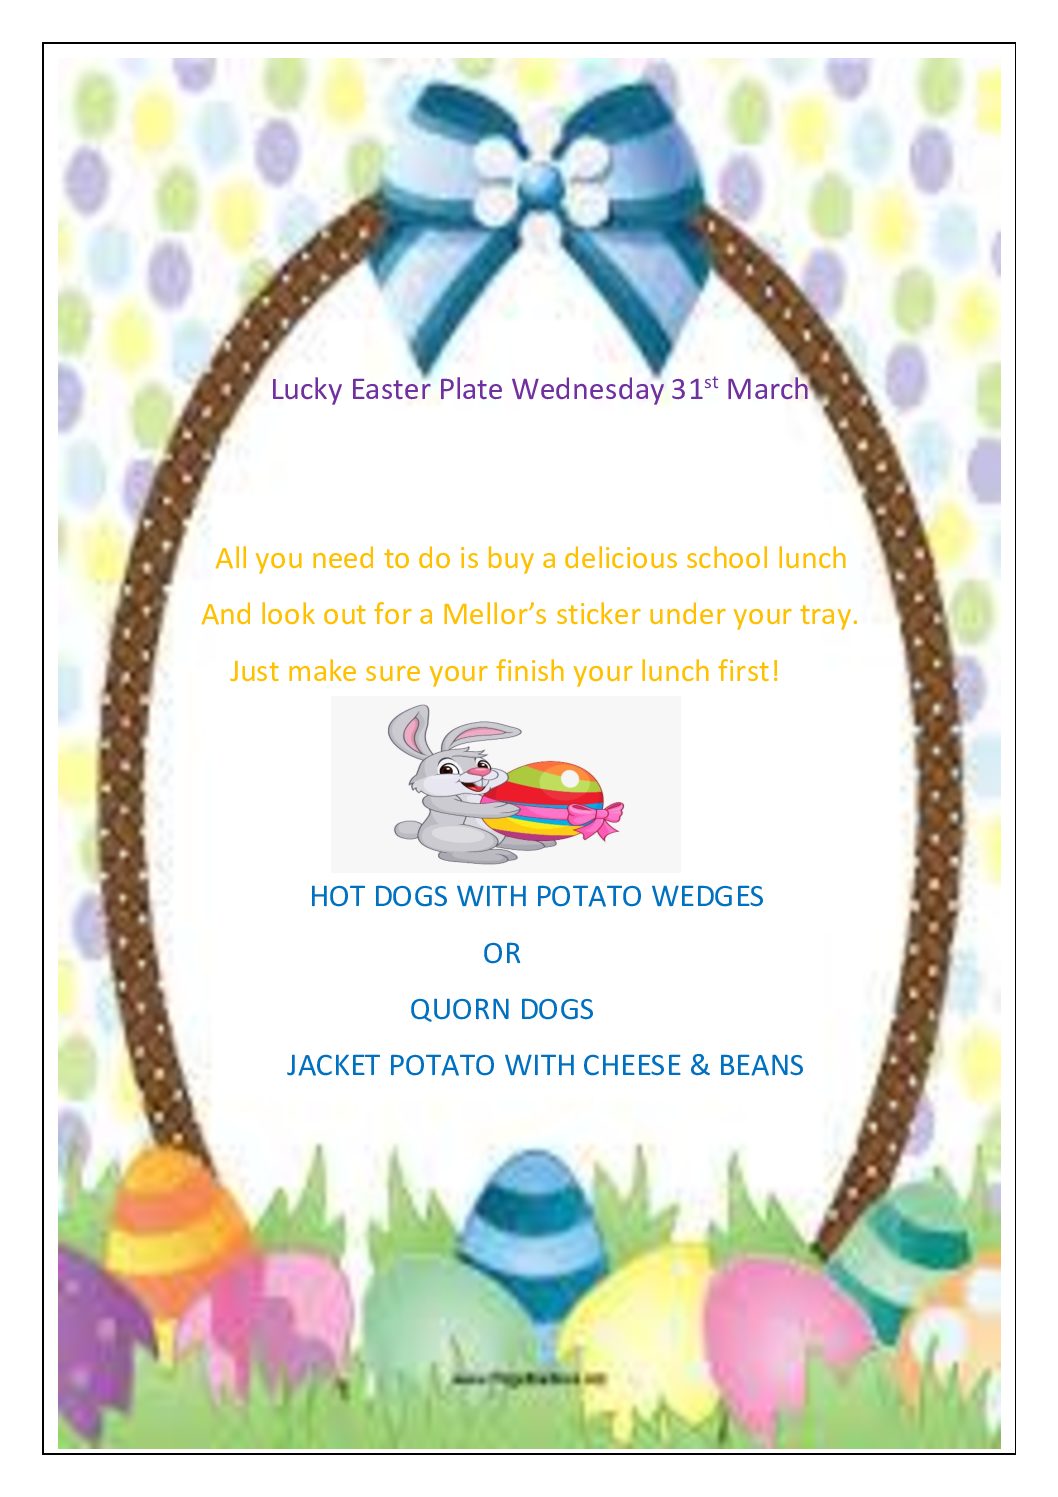 Lucky Easter Plate, Wednesday 31st March 2021